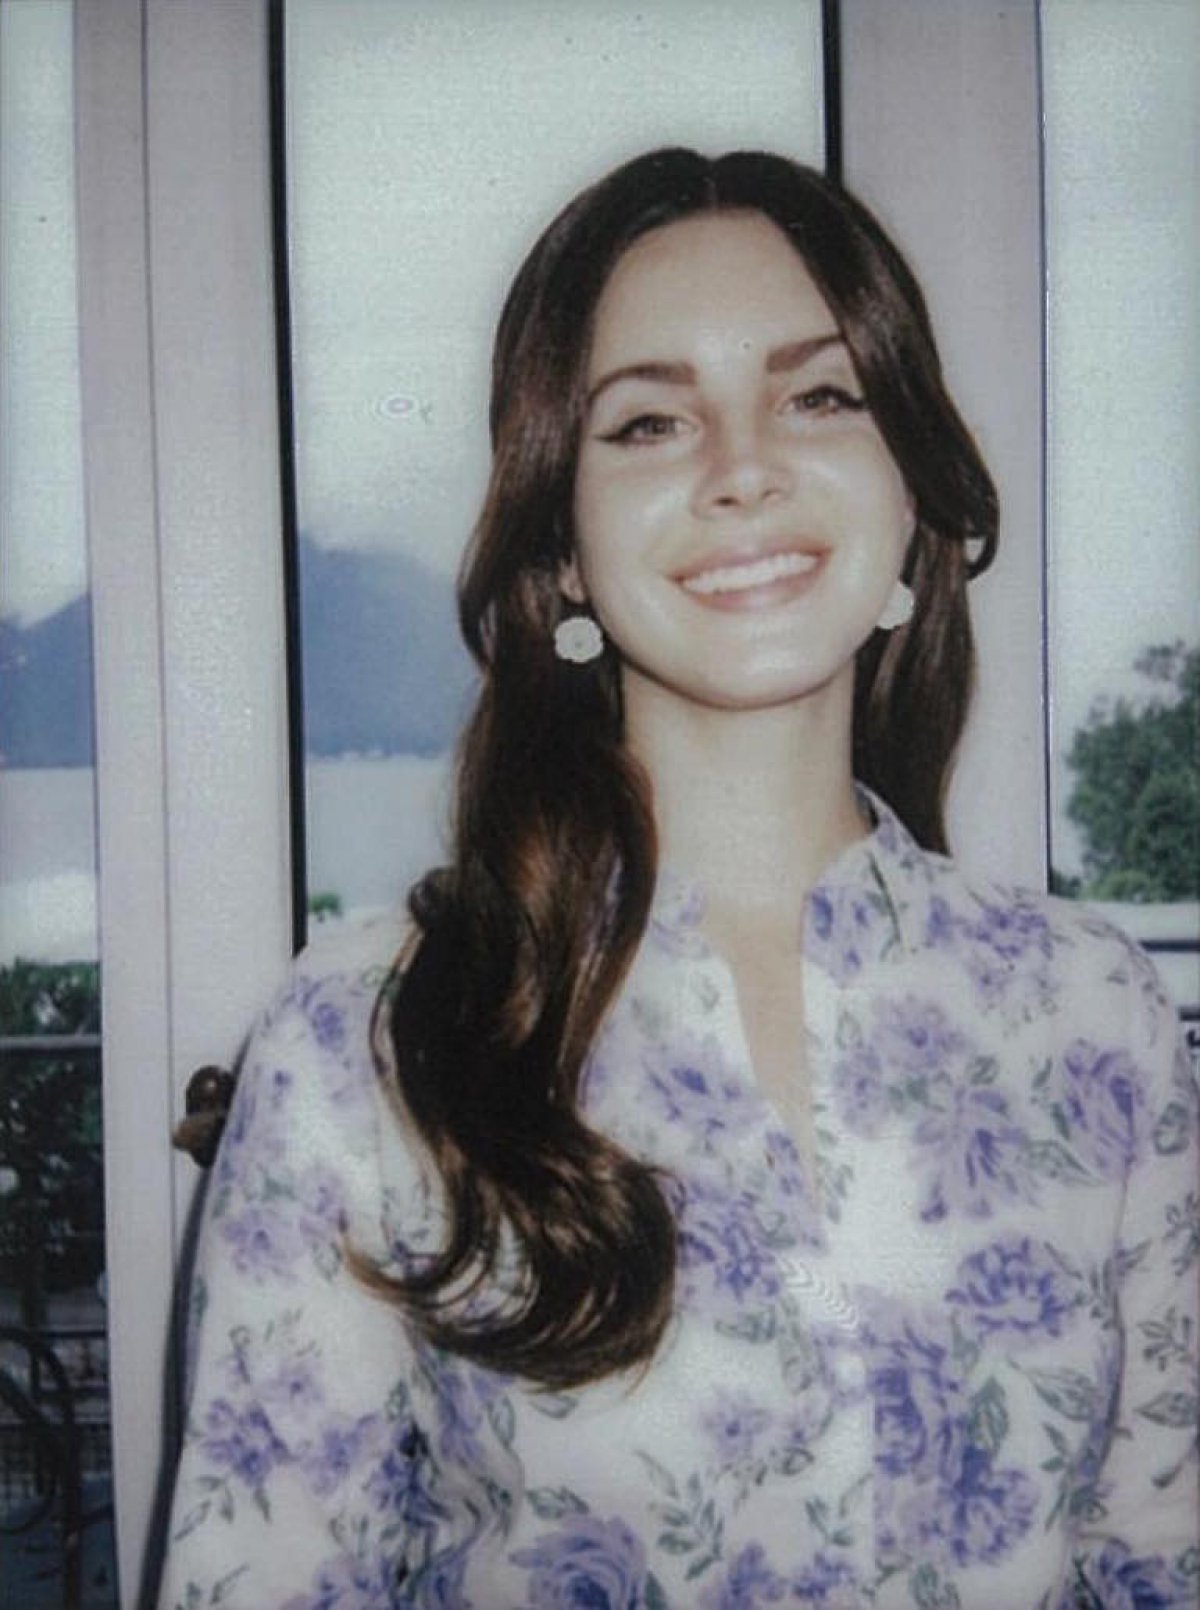 Lana Del Rey to release 'Did You Know' album in March 2023 Reality TV